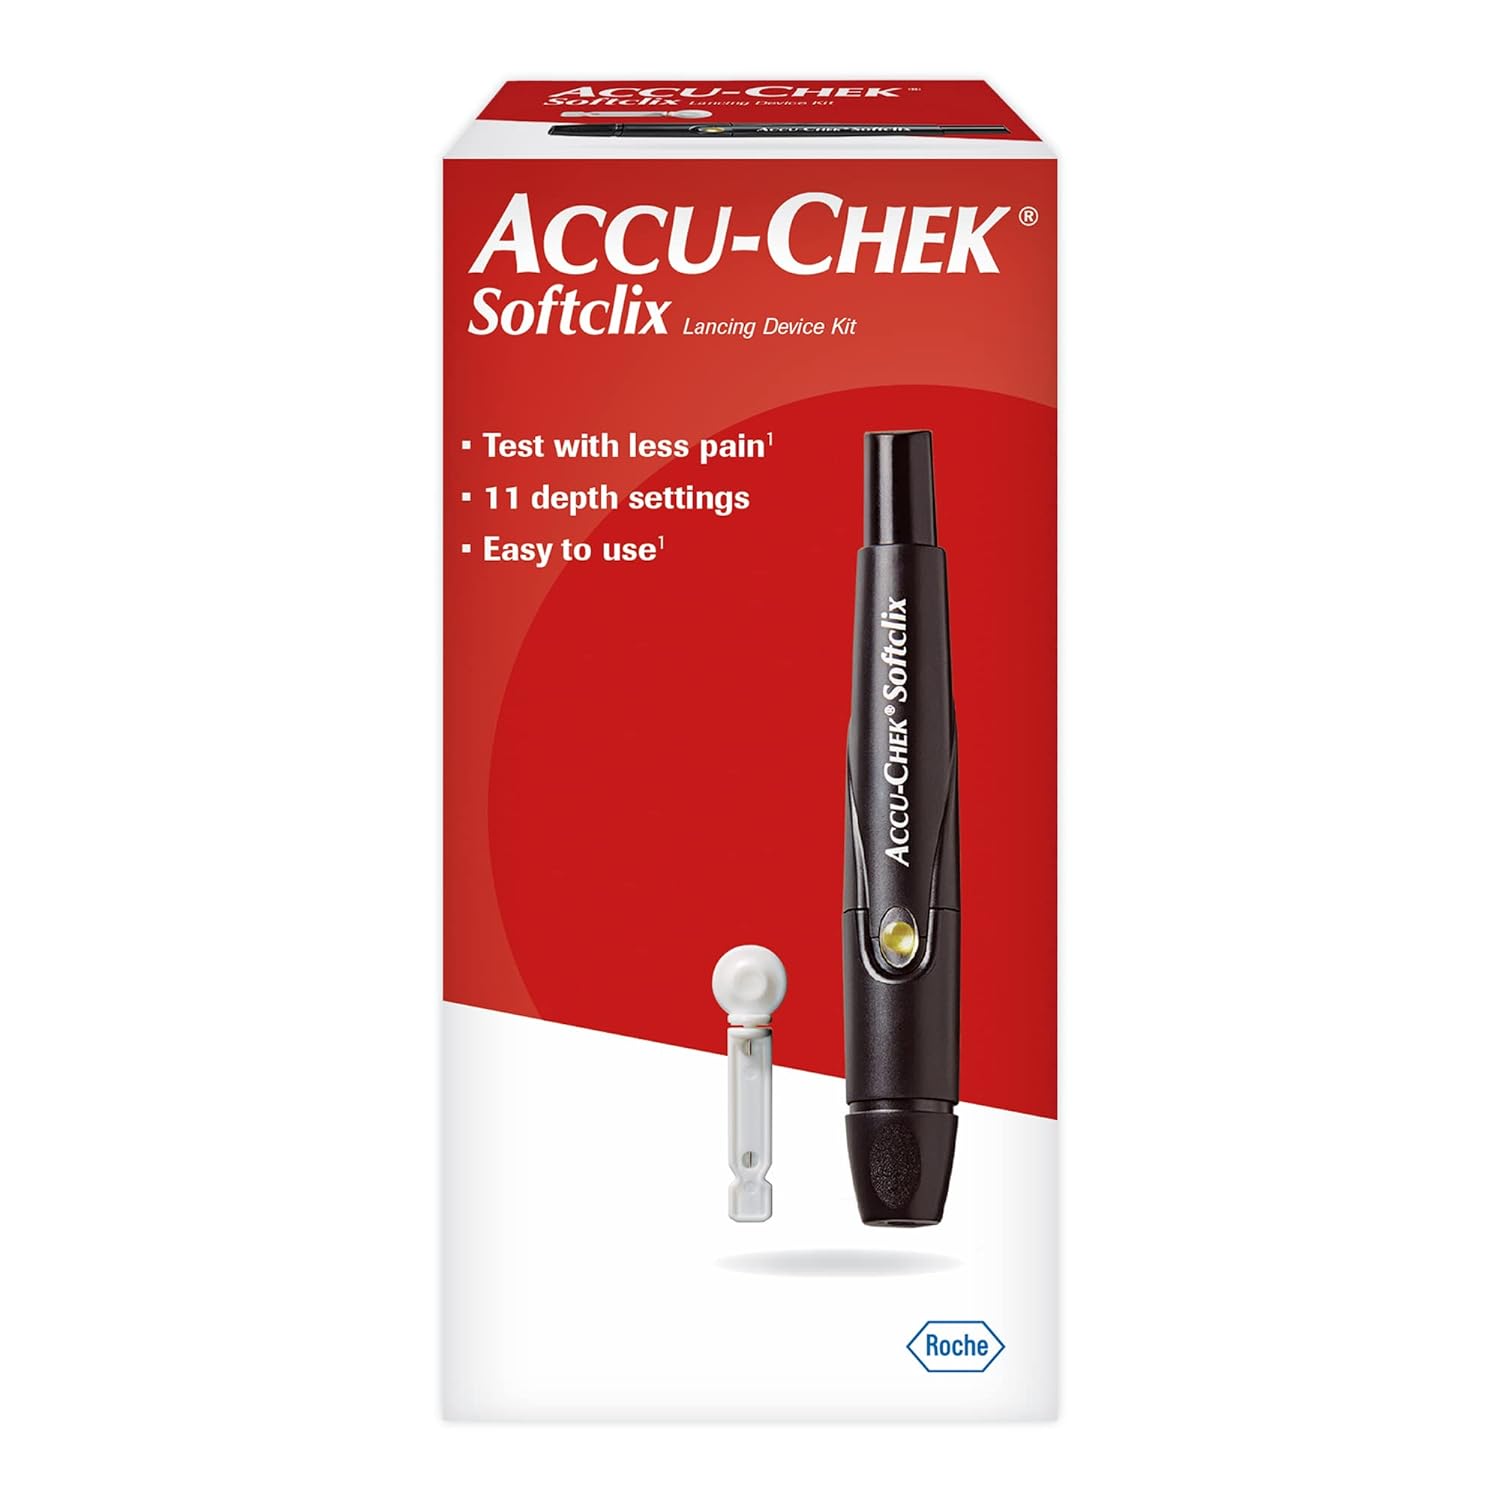 Accu-Chek Softclix Diabetes Lancing Device with 10 Softclix Lancets for Diabetic Blood Glucose Testing (Packaging May Vary